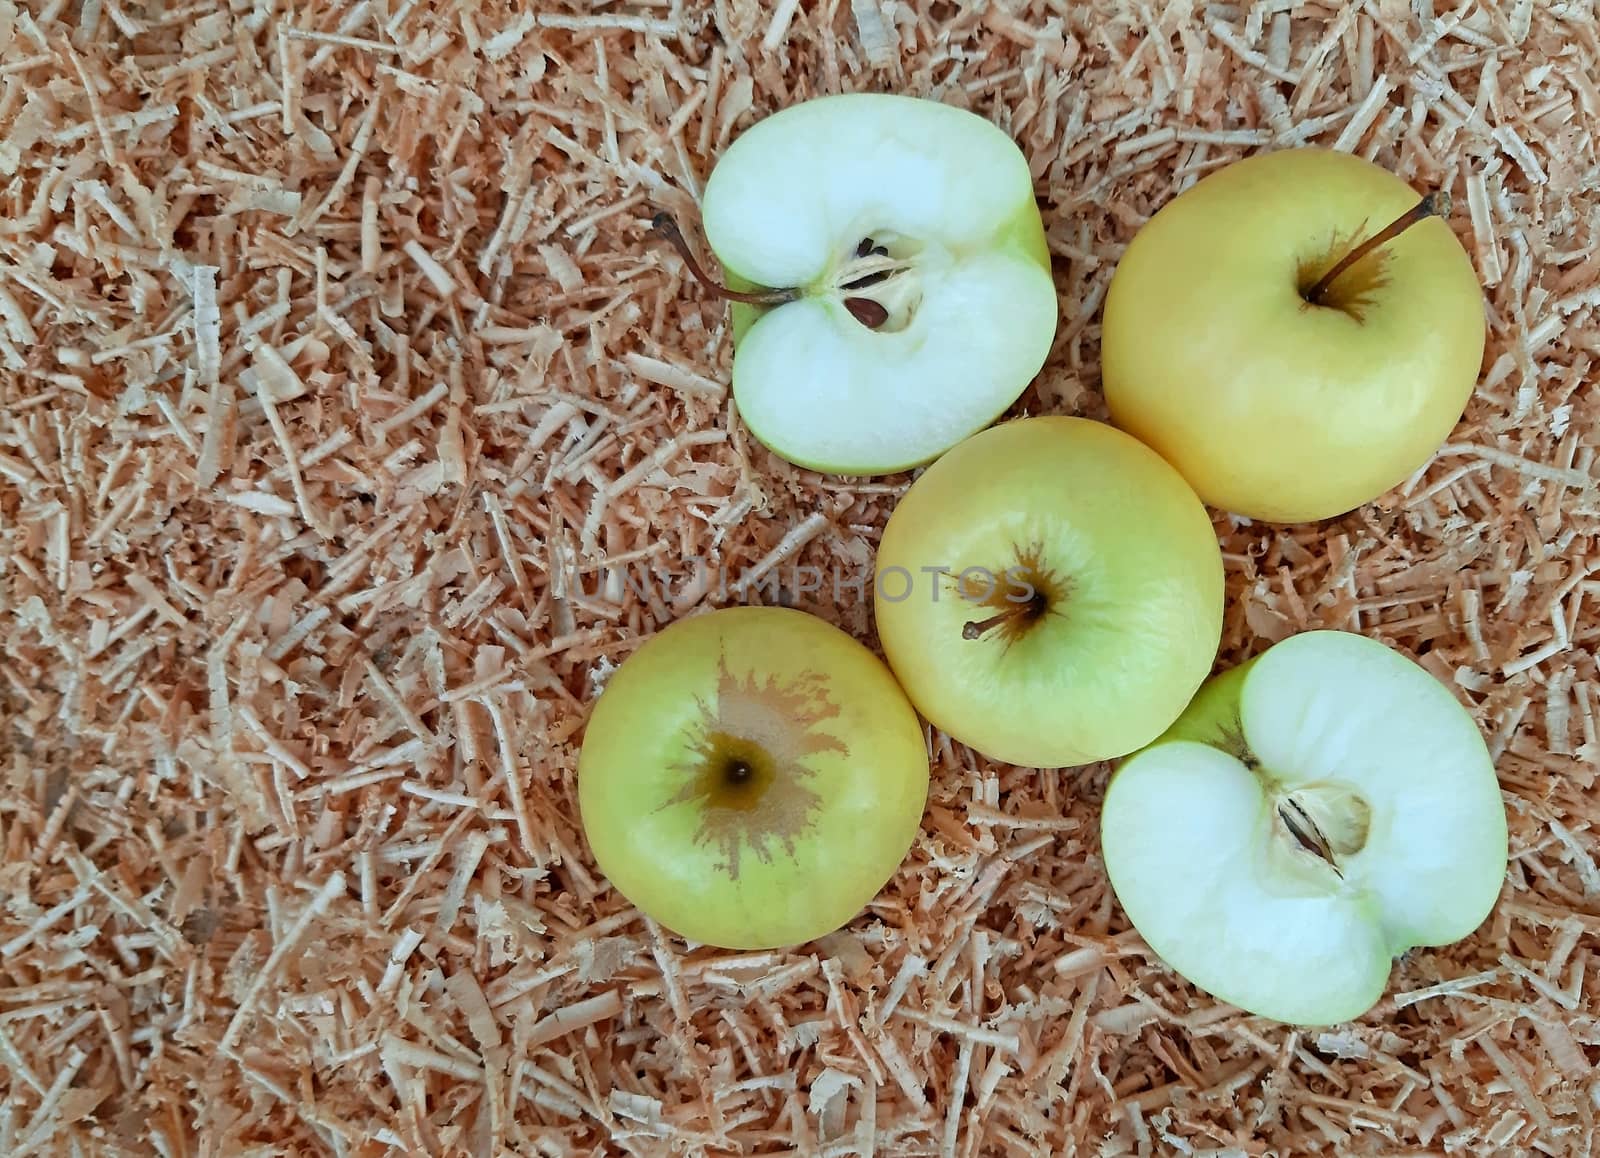 White apples on the background of sawdust.